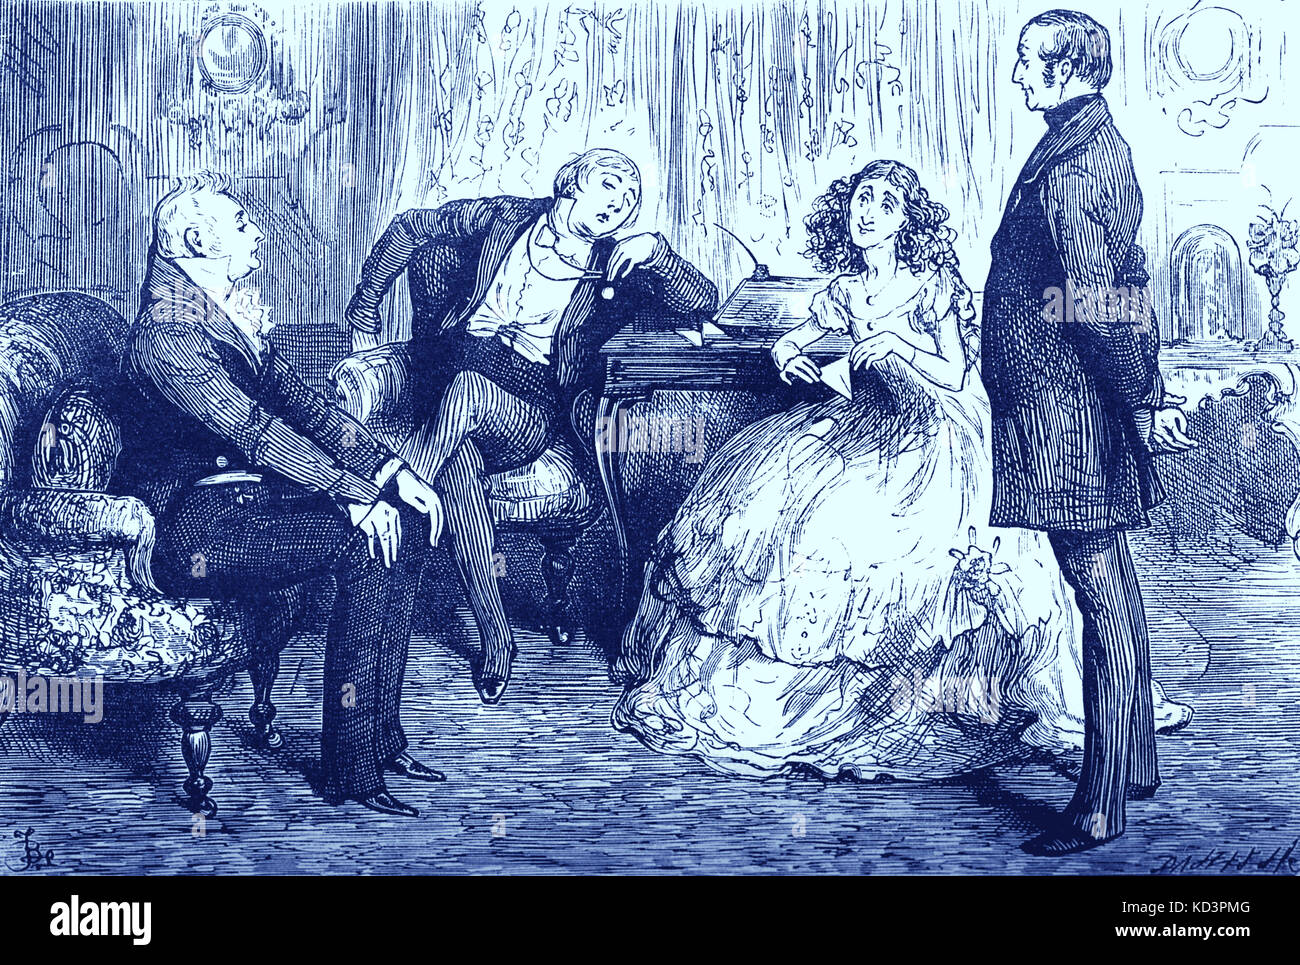 Bleak House by Charles Dickens. Caption reads:'Hasn't a doubt - zample - far better hang wrong flre than no fler.' Sir Leicester Dedlock, Mr. Bucket and Volumnia. CD: English novelist, 7 February 1812 – 9 June 1870. Stock Photo